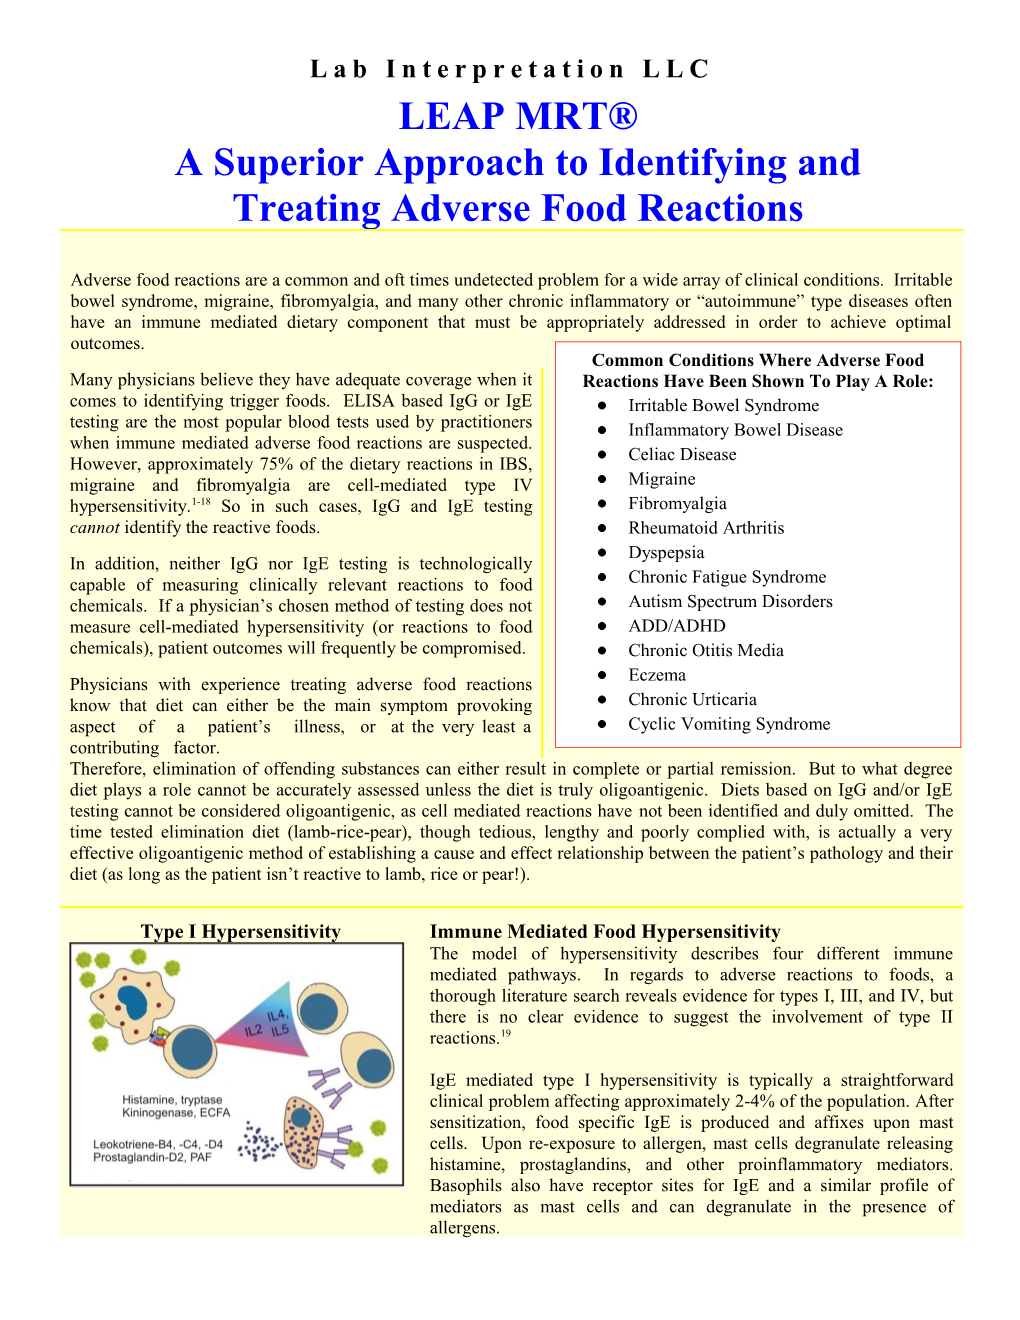 LEAP-MRT: a Superior Approach to Dealing with Adverse Food Reactions